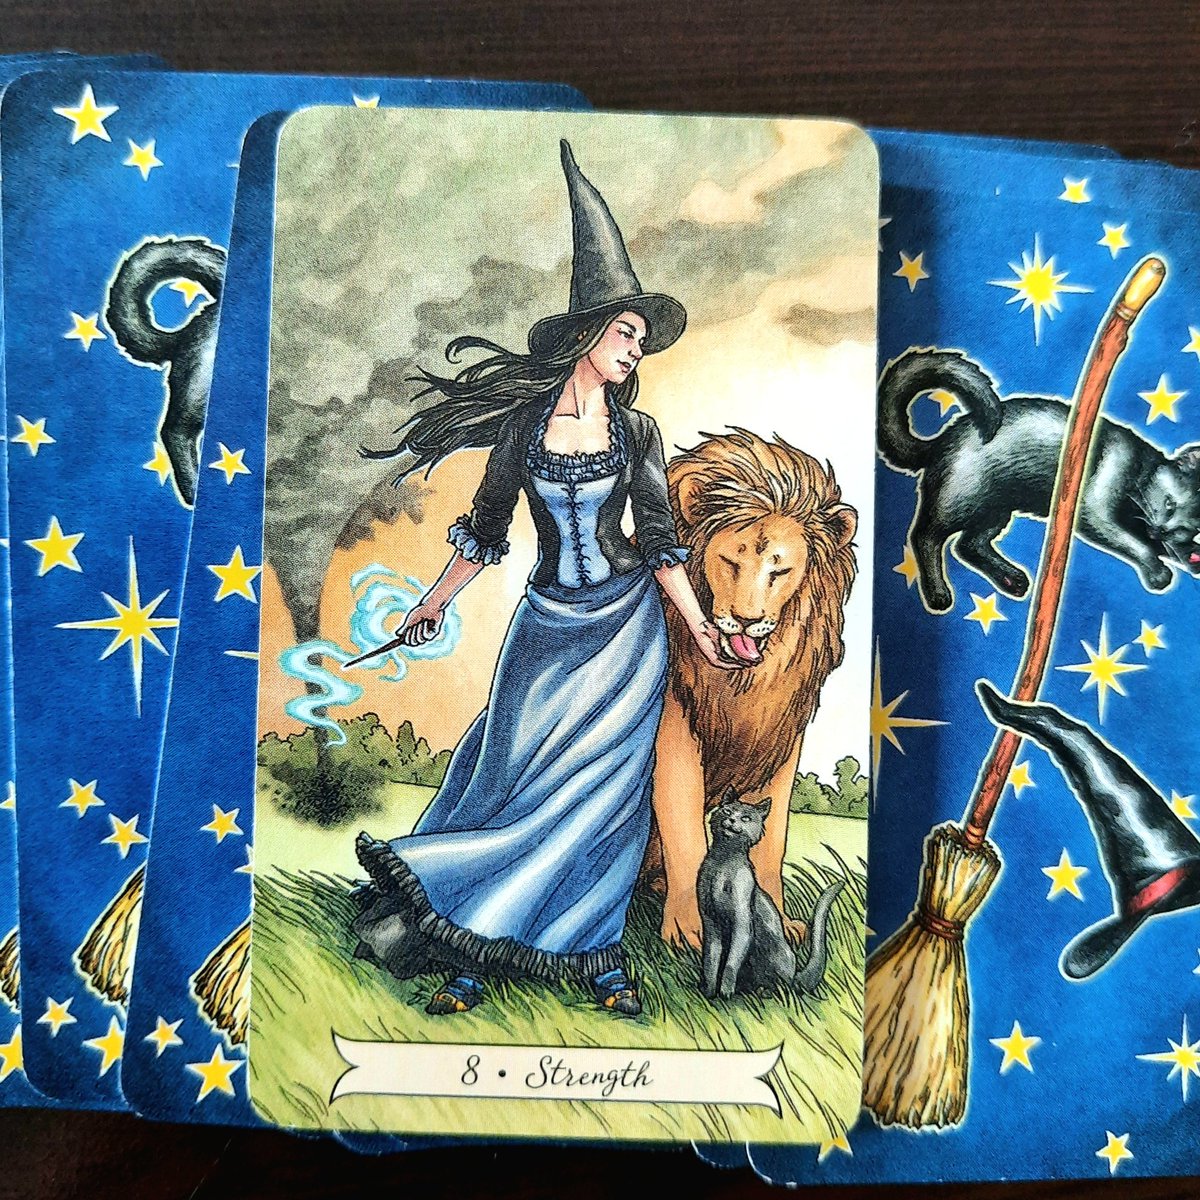 Card of the Day: Strength. You can't always choose what happens, but you can always choose how you react. When the storm rages around you, maintain your inner peace. #dailytarot #dailydivination #amtarot from The Everyday Witch Tarot by @deborahblake and @elisabethalba